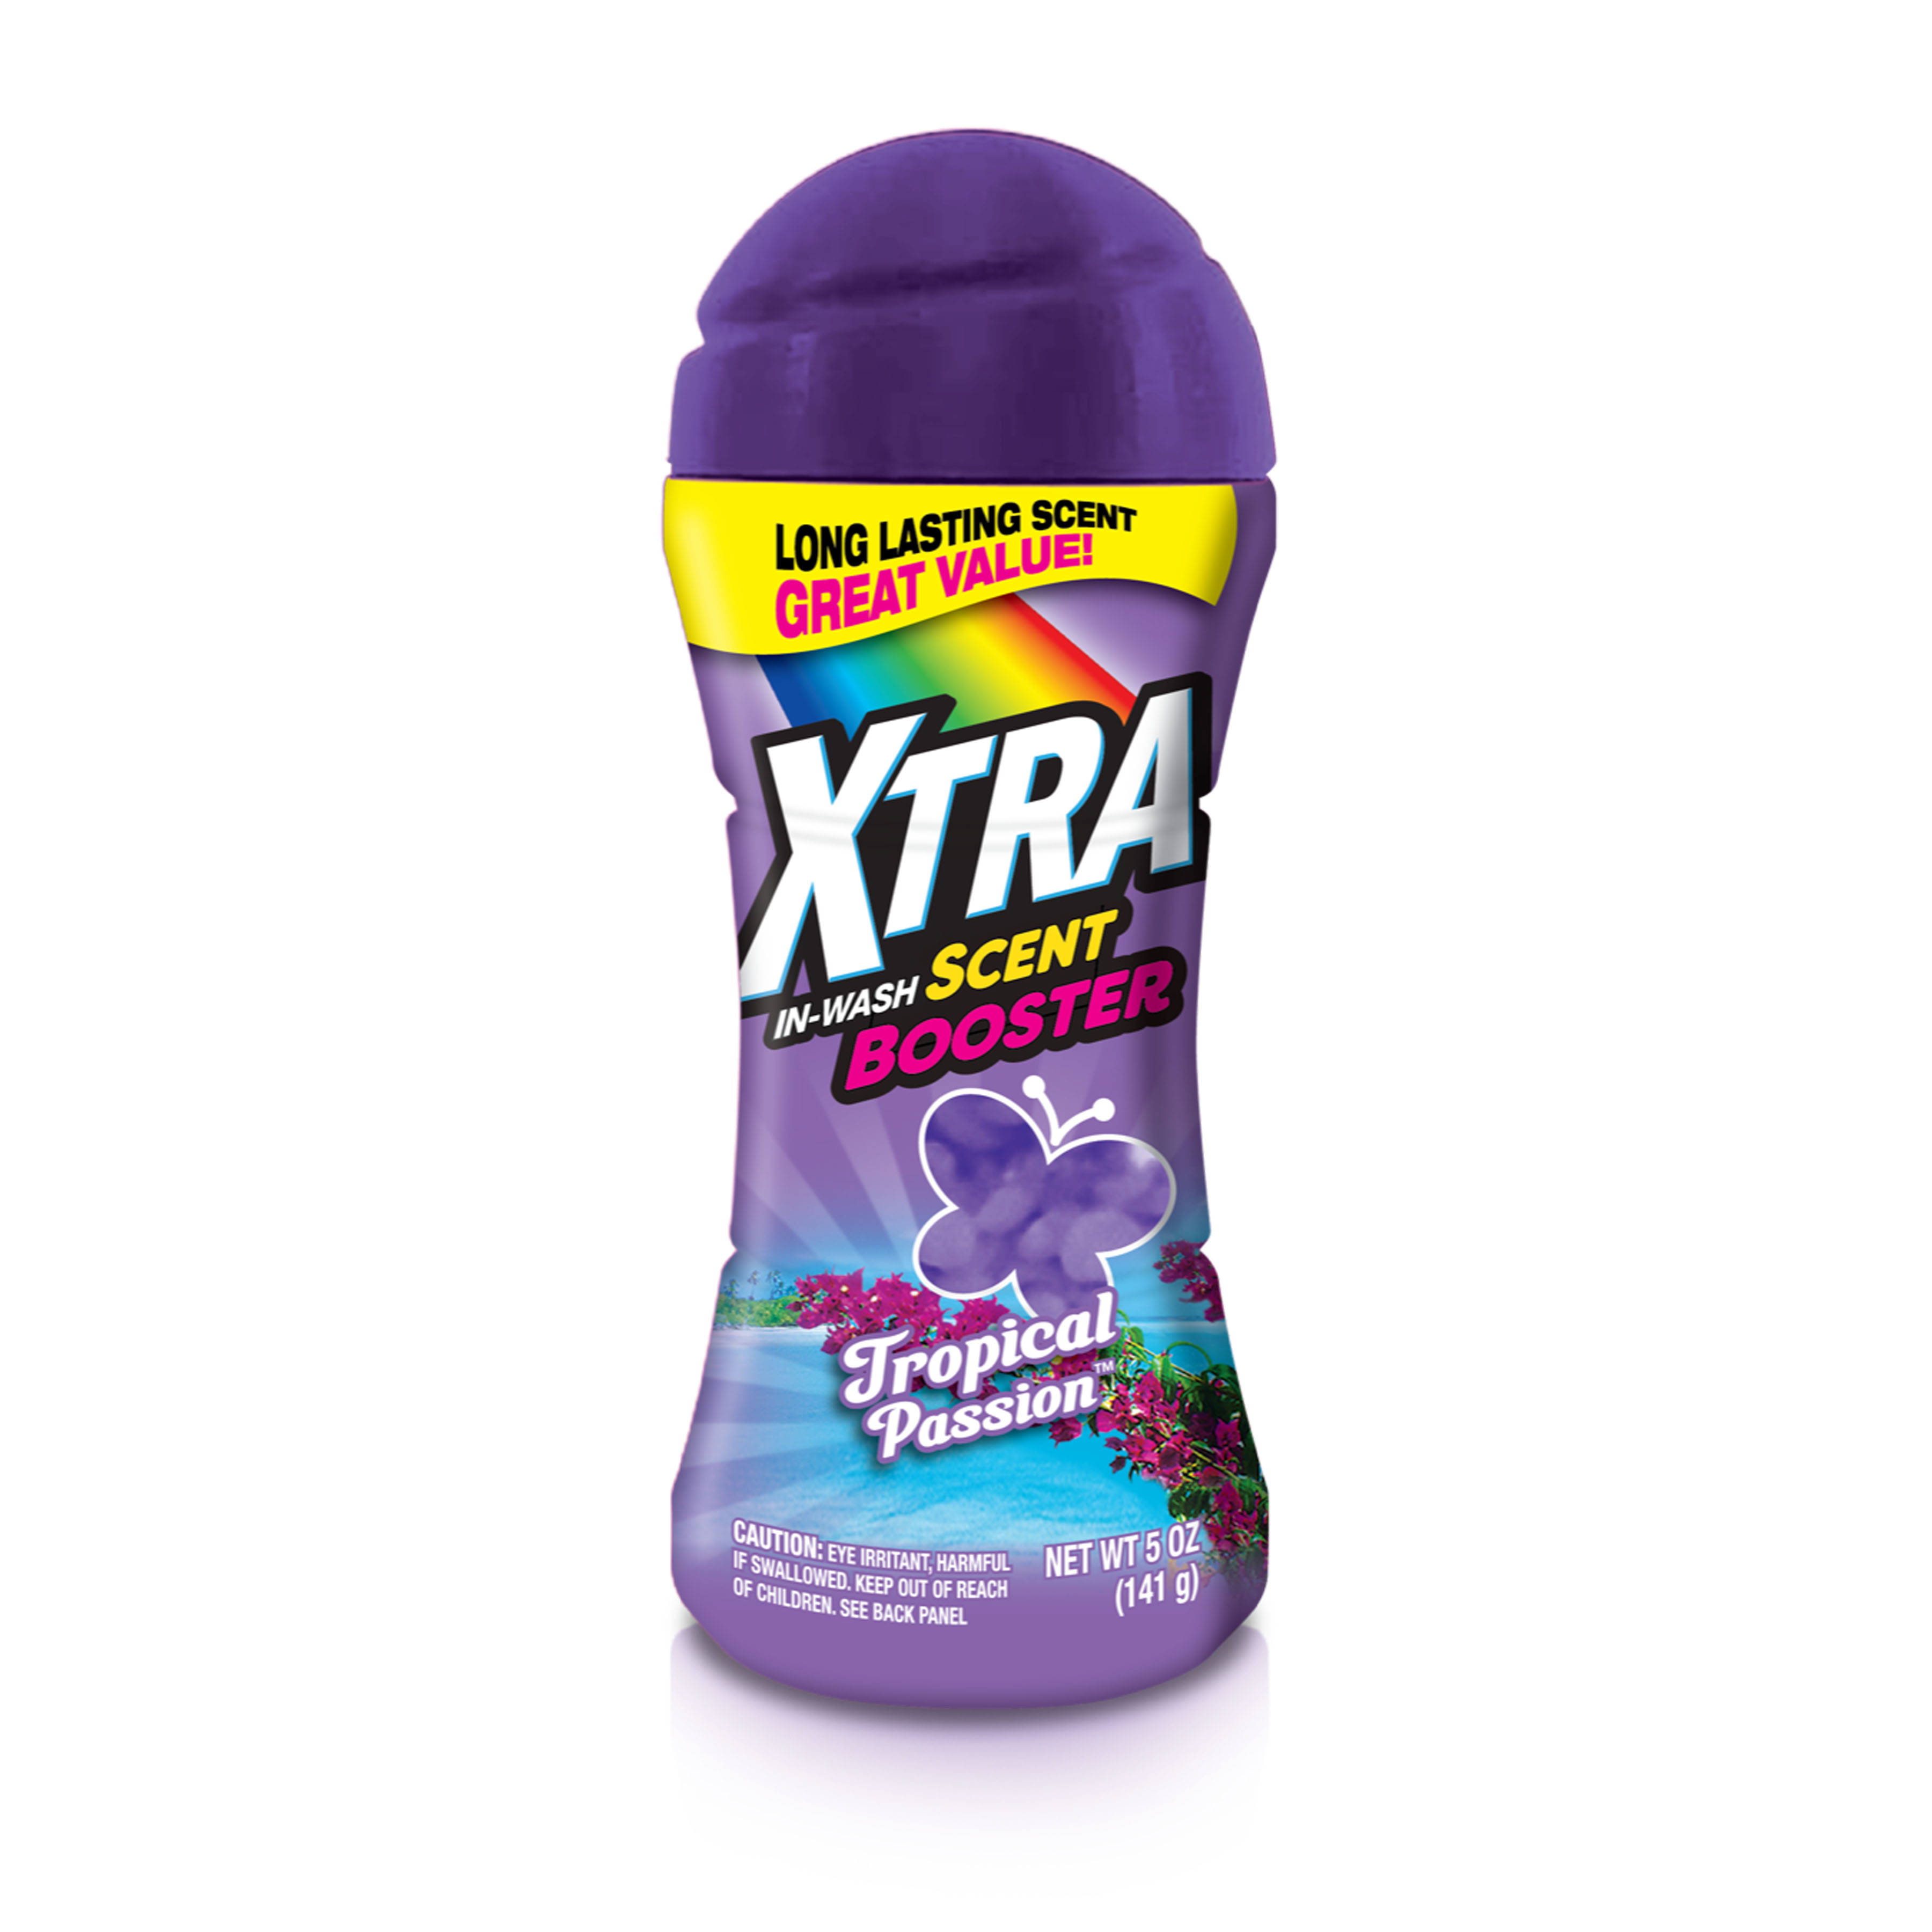 XTRA Nice'N Fluffy 5 oz. Scent Booster, Tropical Passion